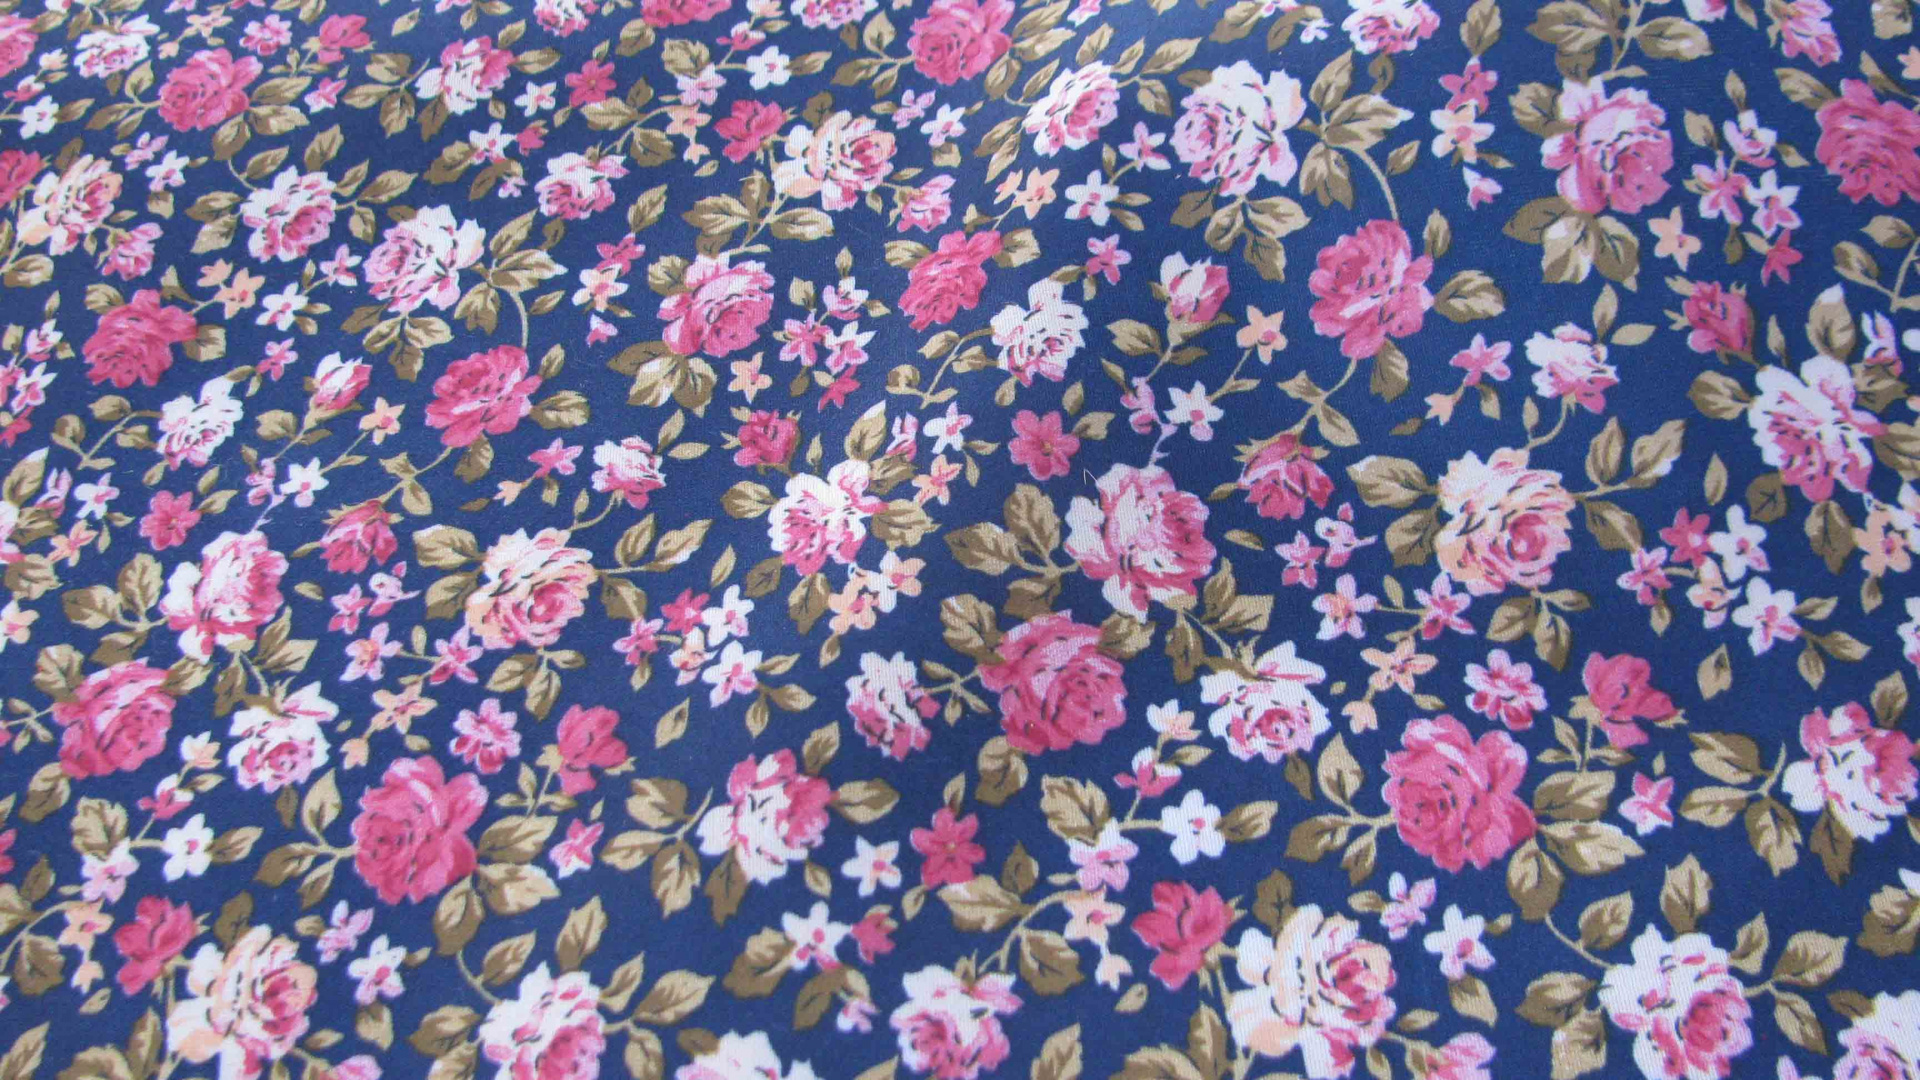 Wallpaper Blue Pink and White Floral Textile, Full HD, HDTV, 1080p 16:9 ...